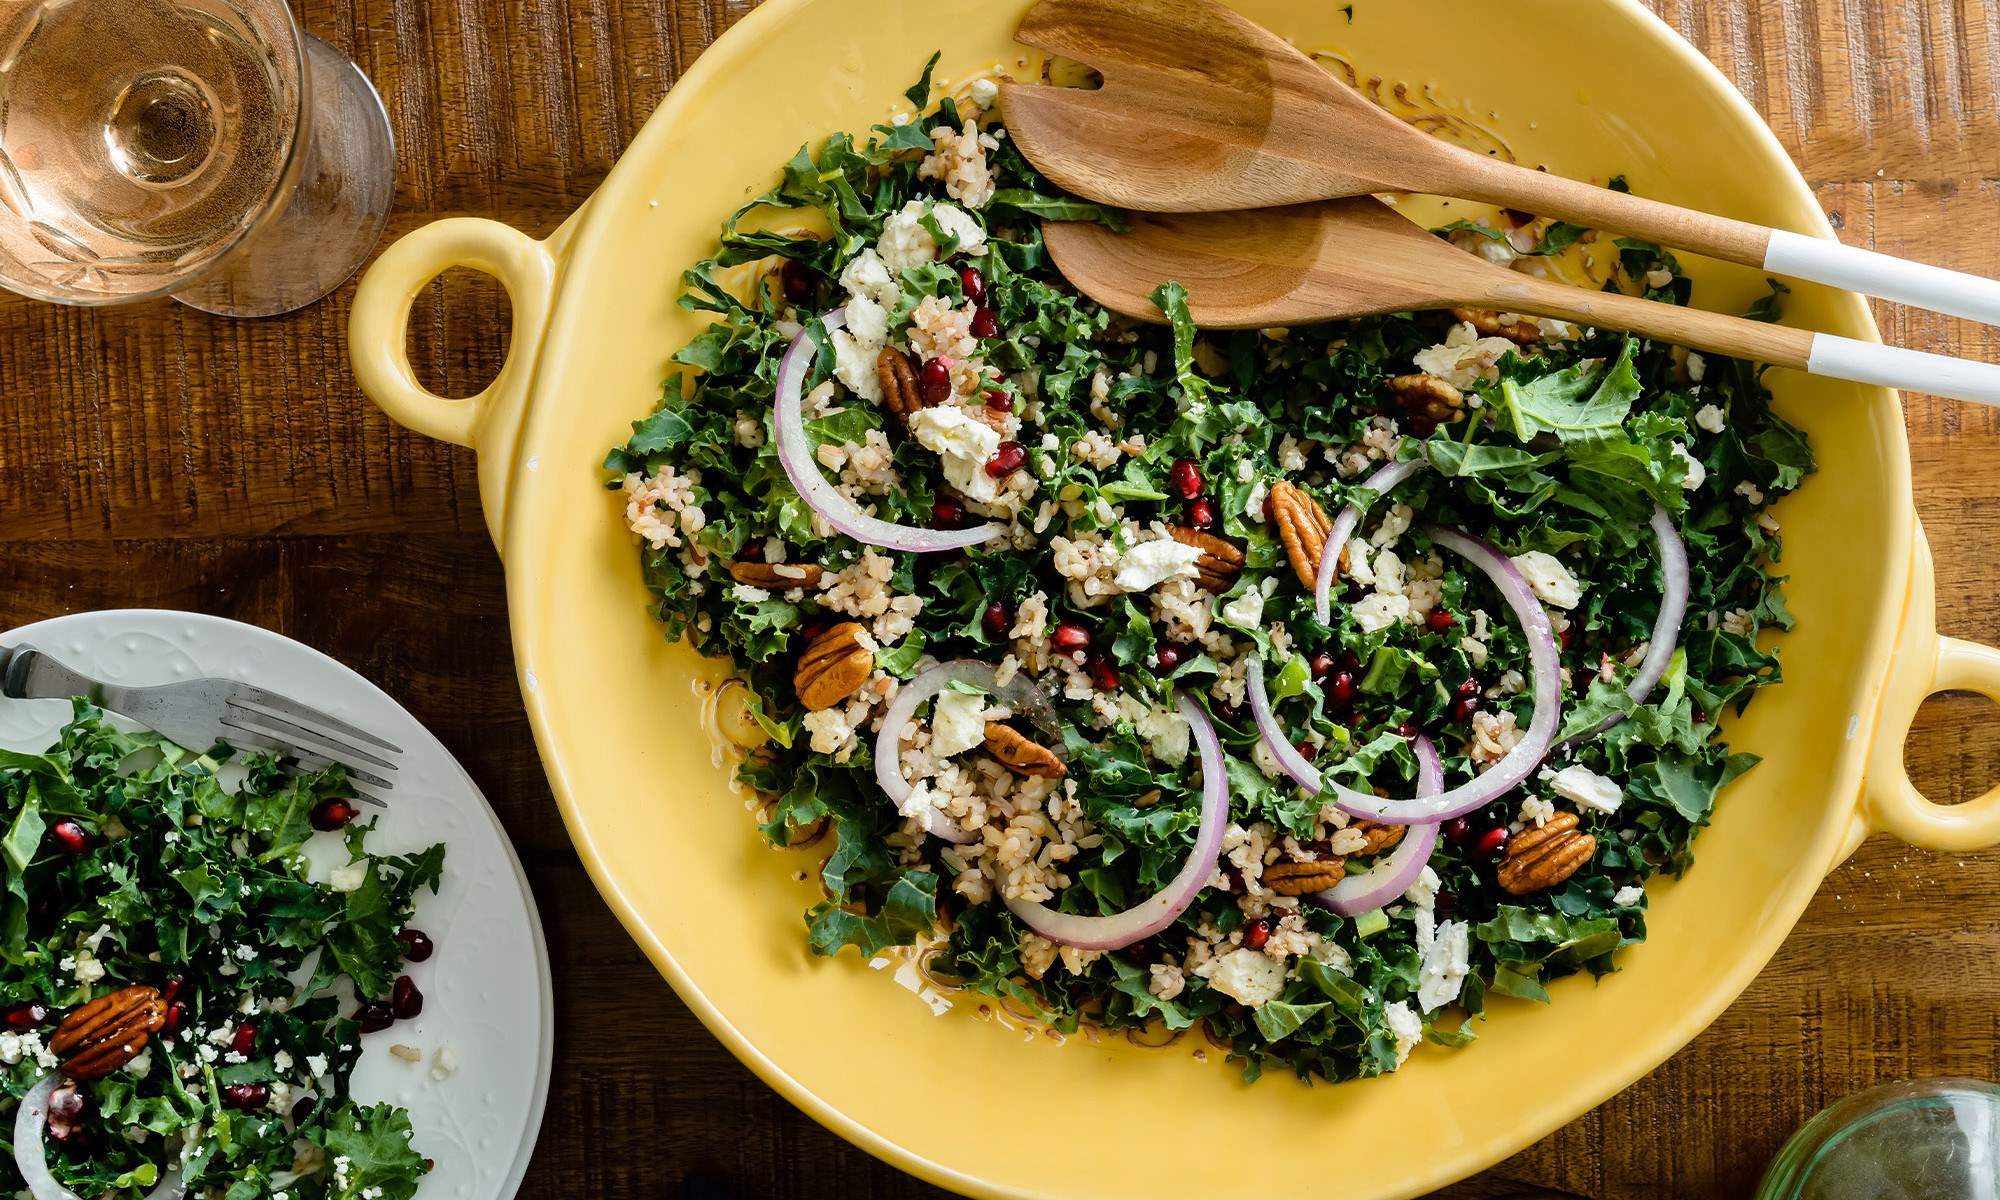 Have Leftover Rice? This Crispy, Crunchy Salad Is The Perfect Way To Use It